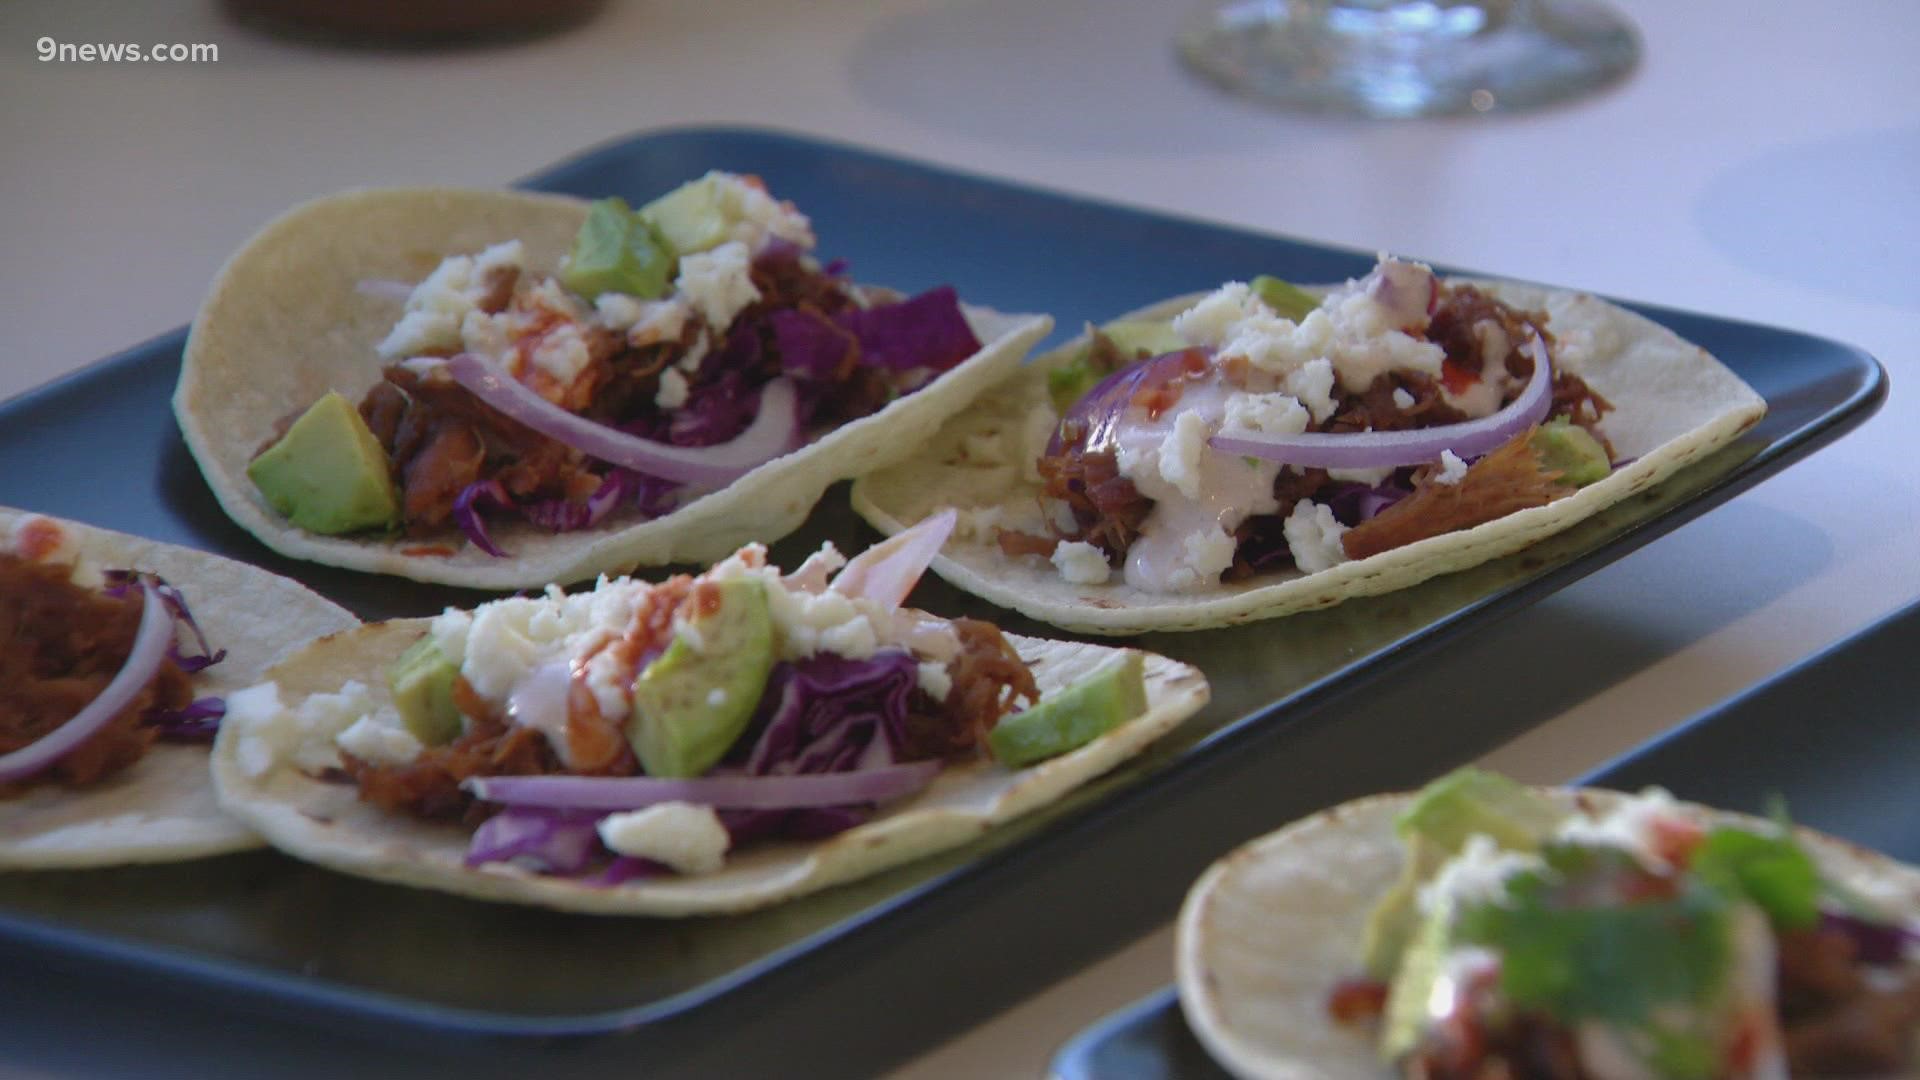 Producer Victoria Valenzuela introduces us to David Cisneros and his sustainable, Hispanic food business.